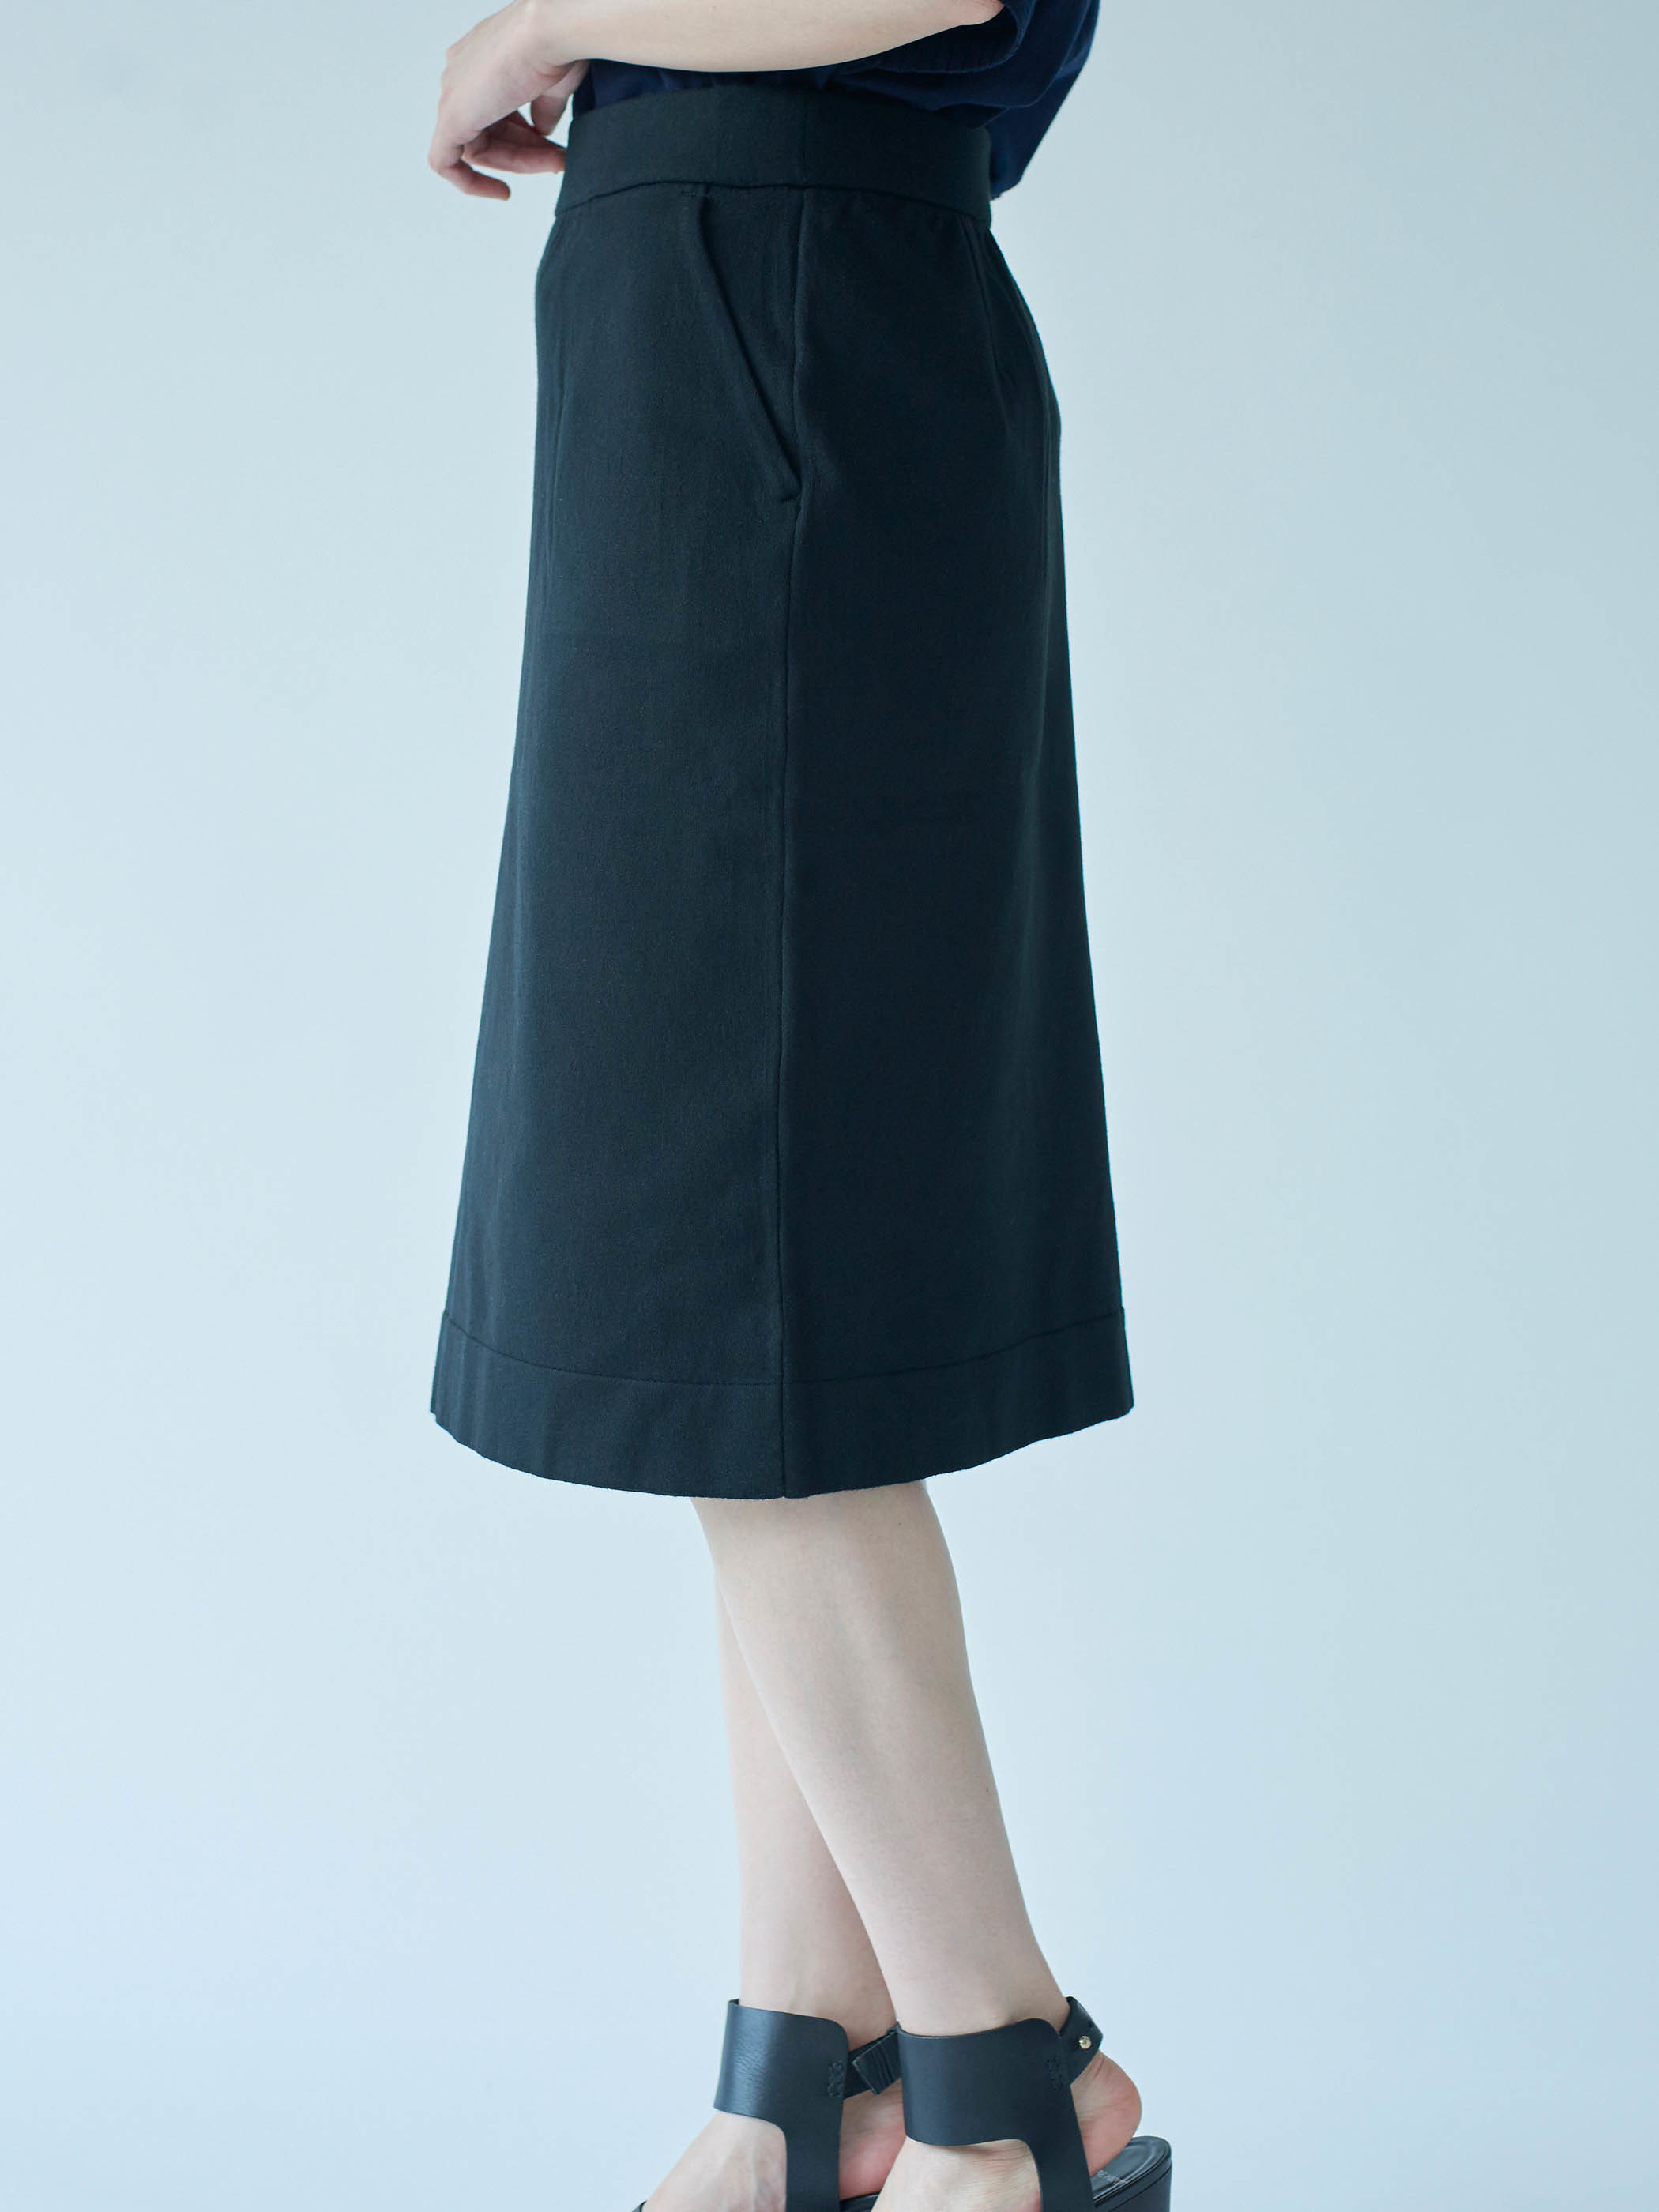 Work Wear collection Women's Tight Skirt Black(タイトスカート・ブラック) - KNITOLOGY